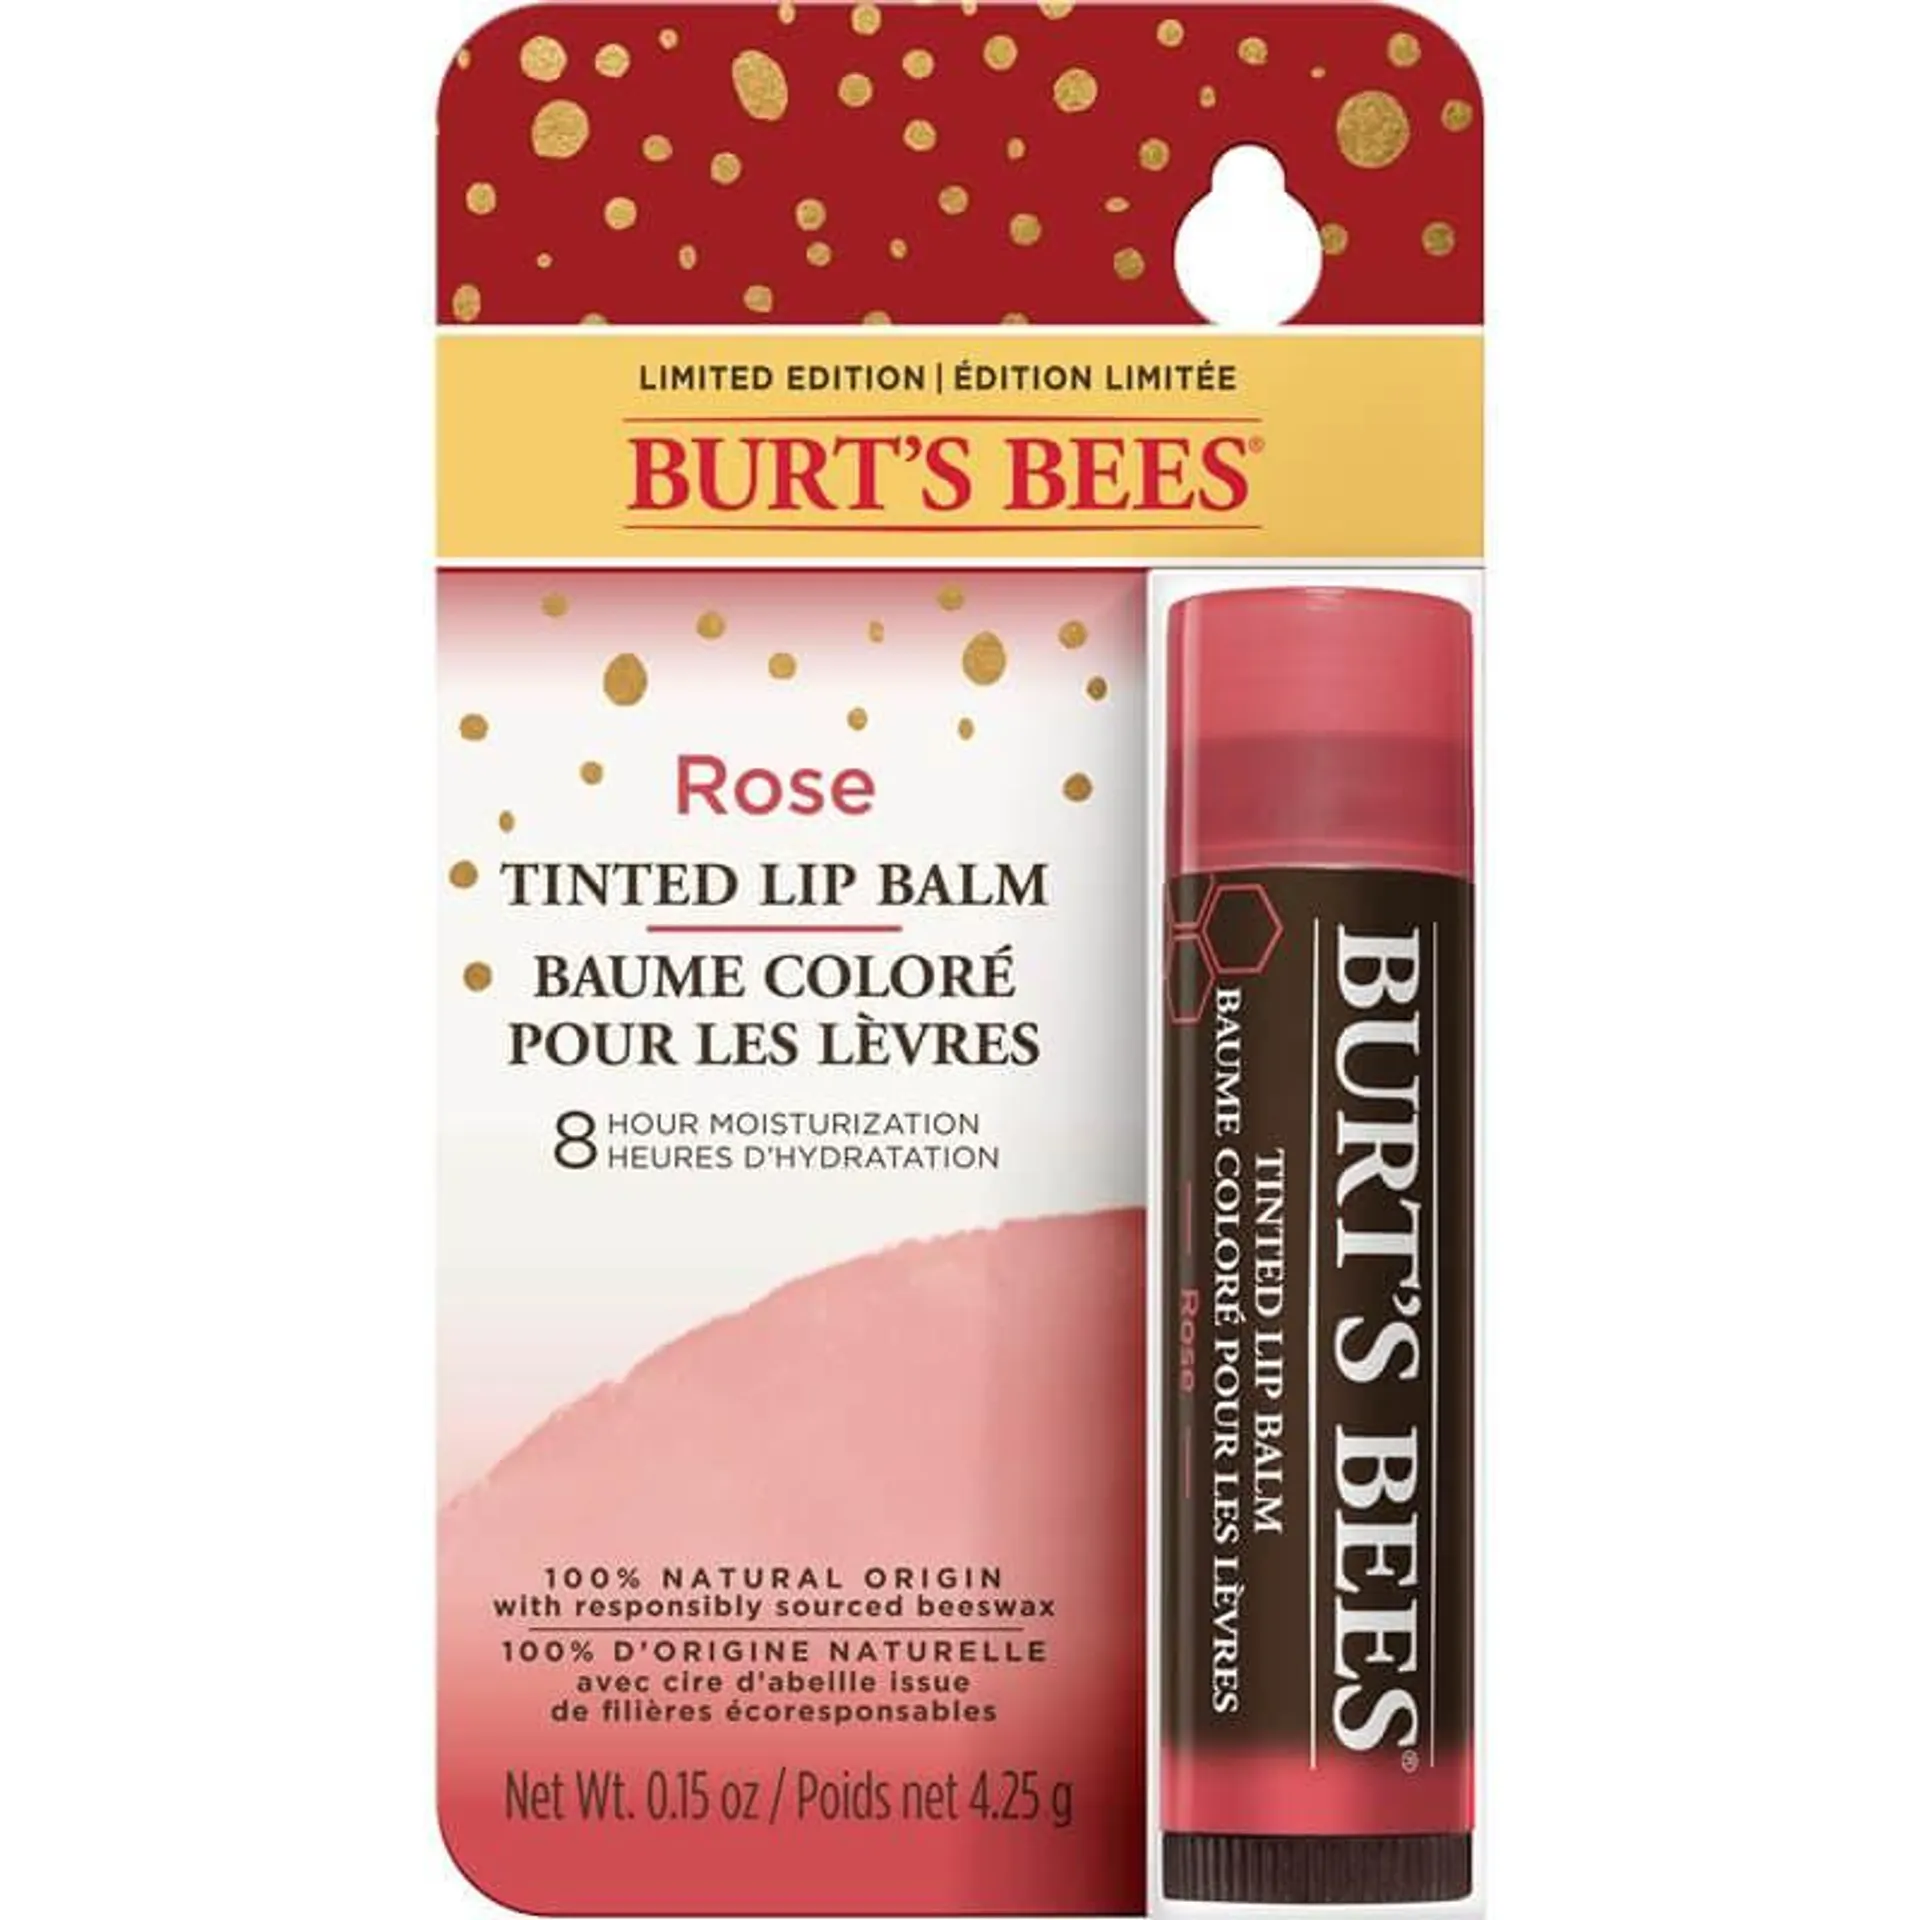 Limited-Edition Holiday Rose Tinted Lip Balm